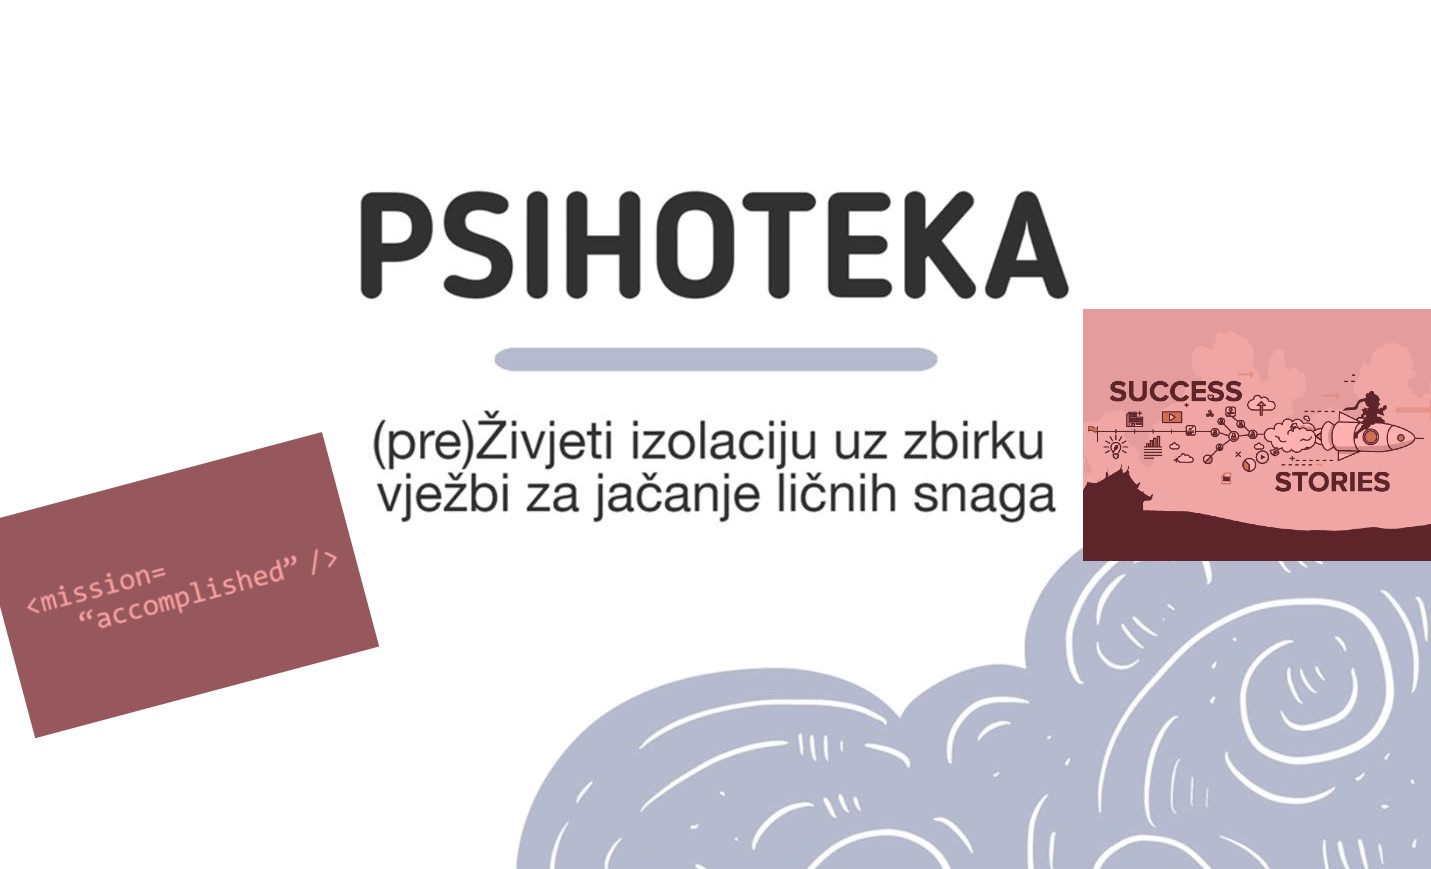 Four Psychologists from Montenegro Created Brochure and Web App for Surviving the Isolation